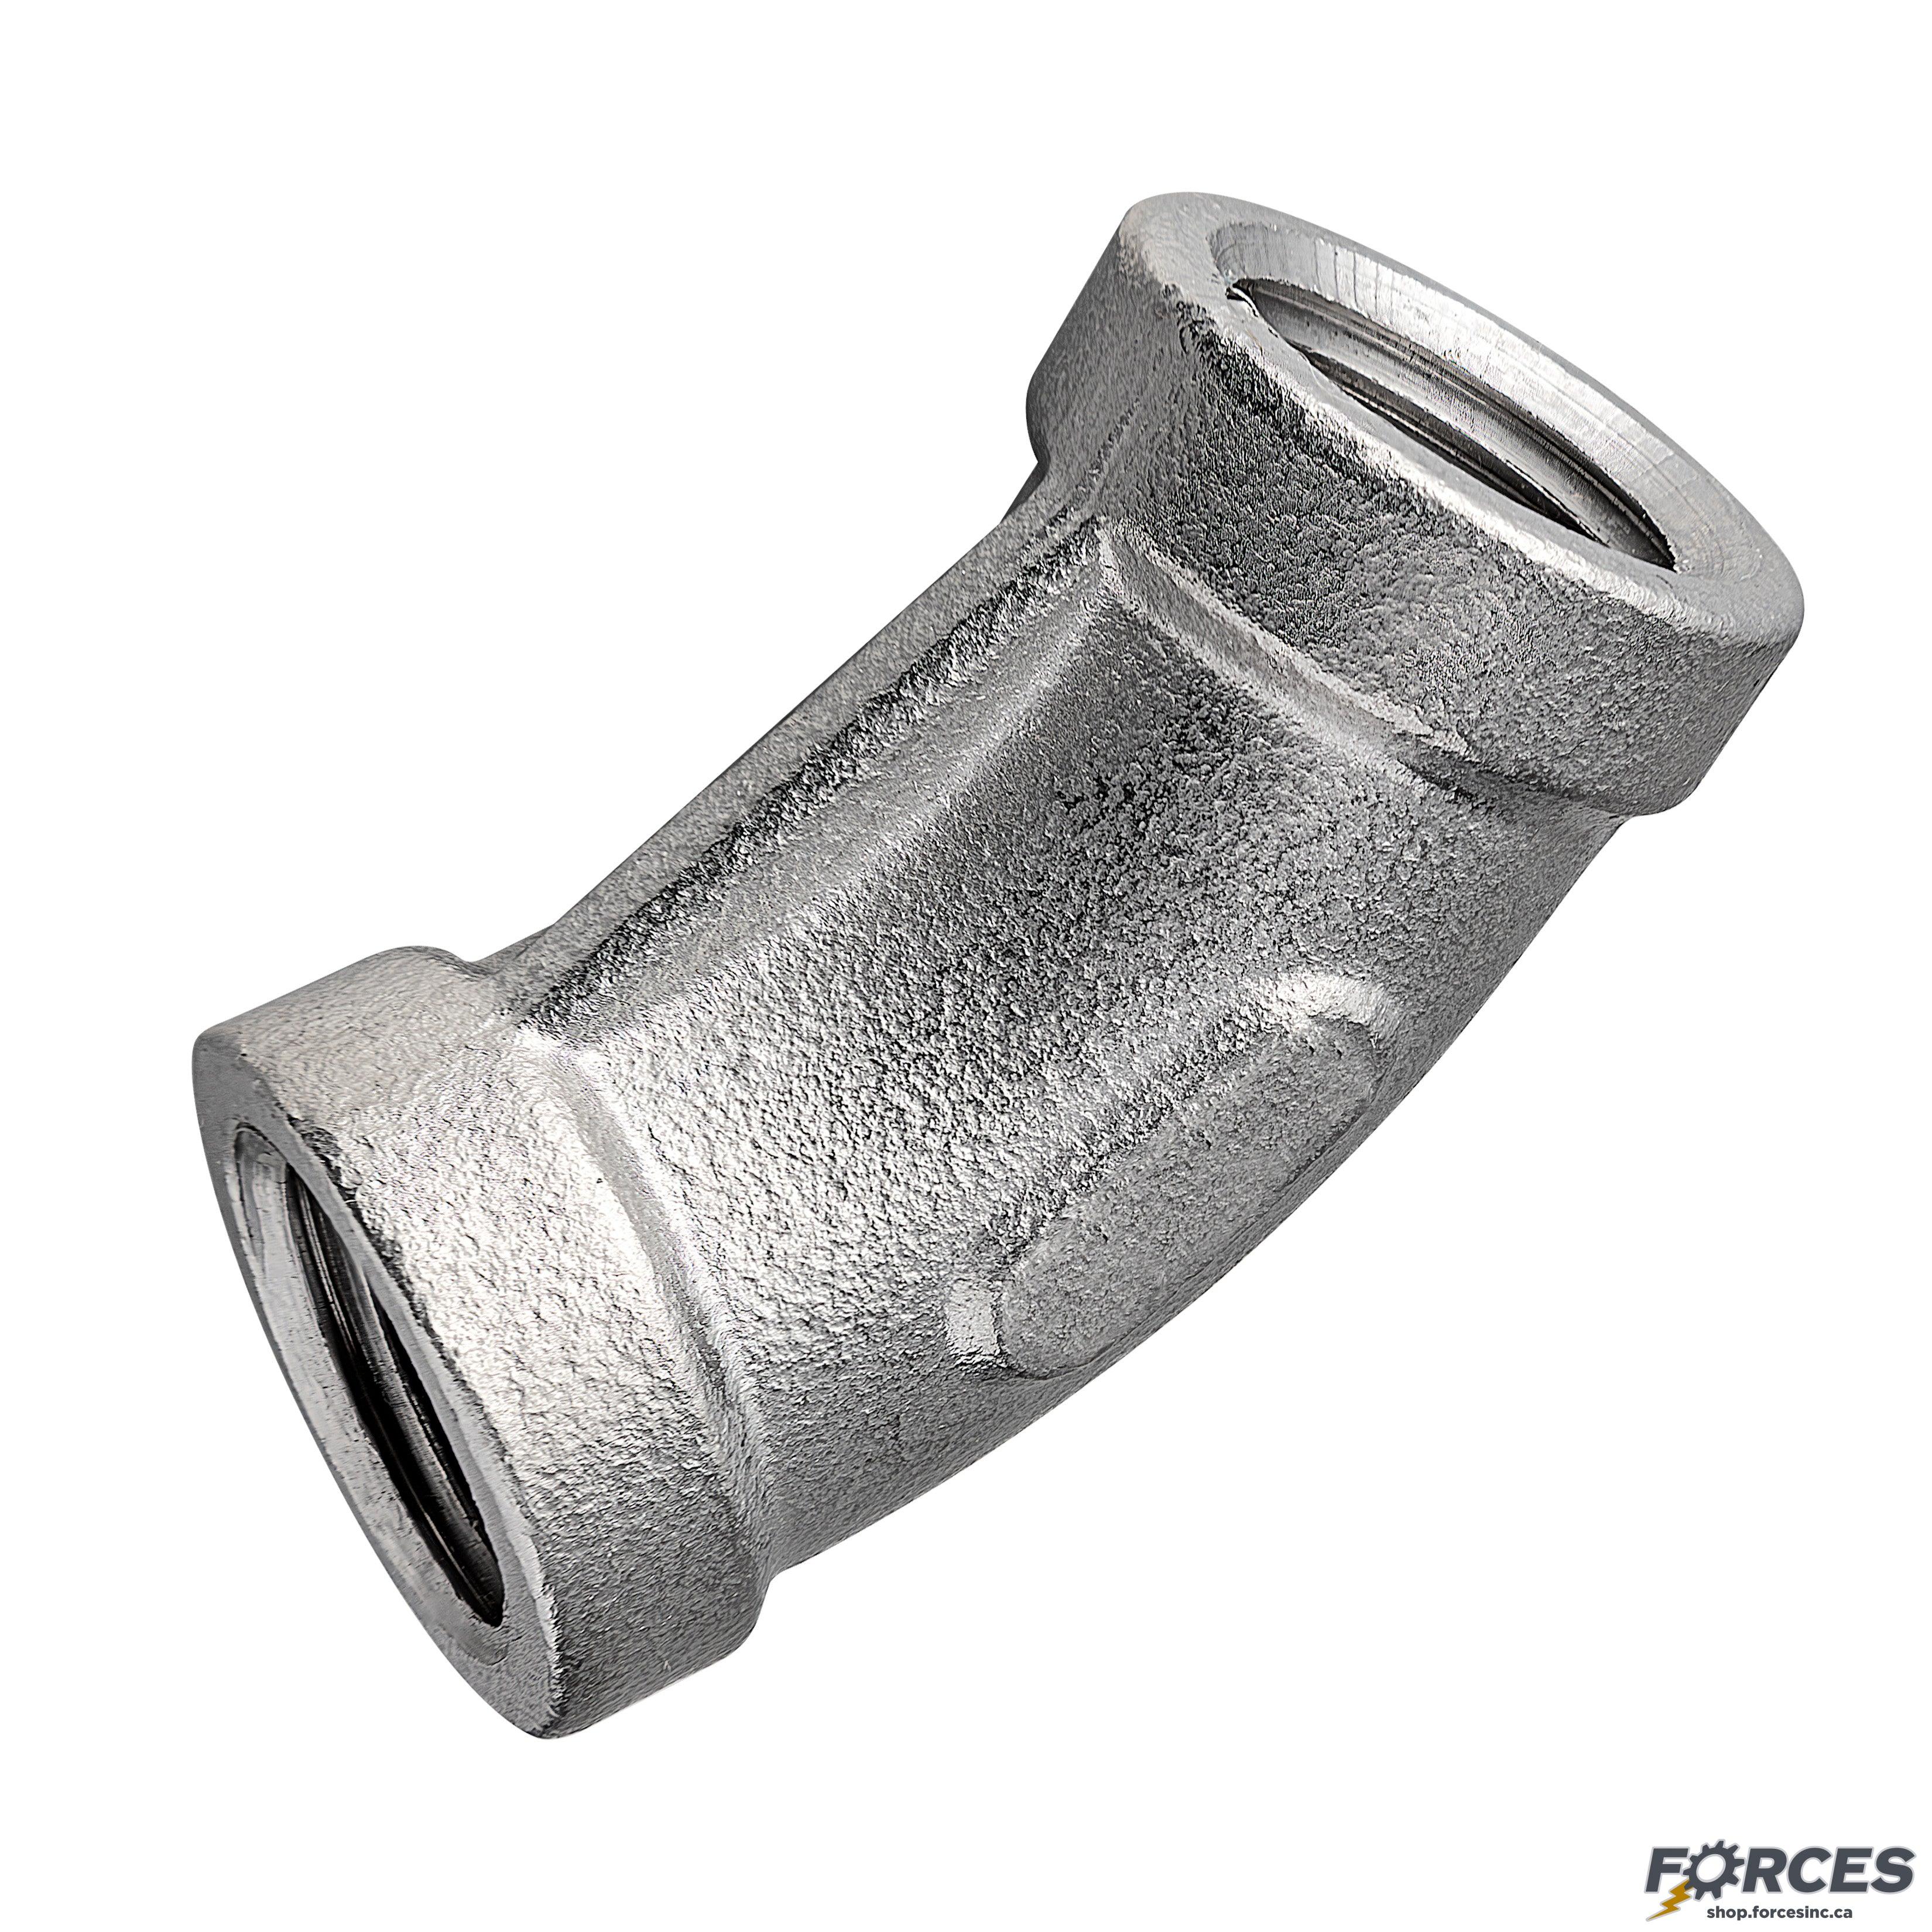 1/4" Elbow 45° NPT #150 - Stainless Steel 316 - Forces Inc